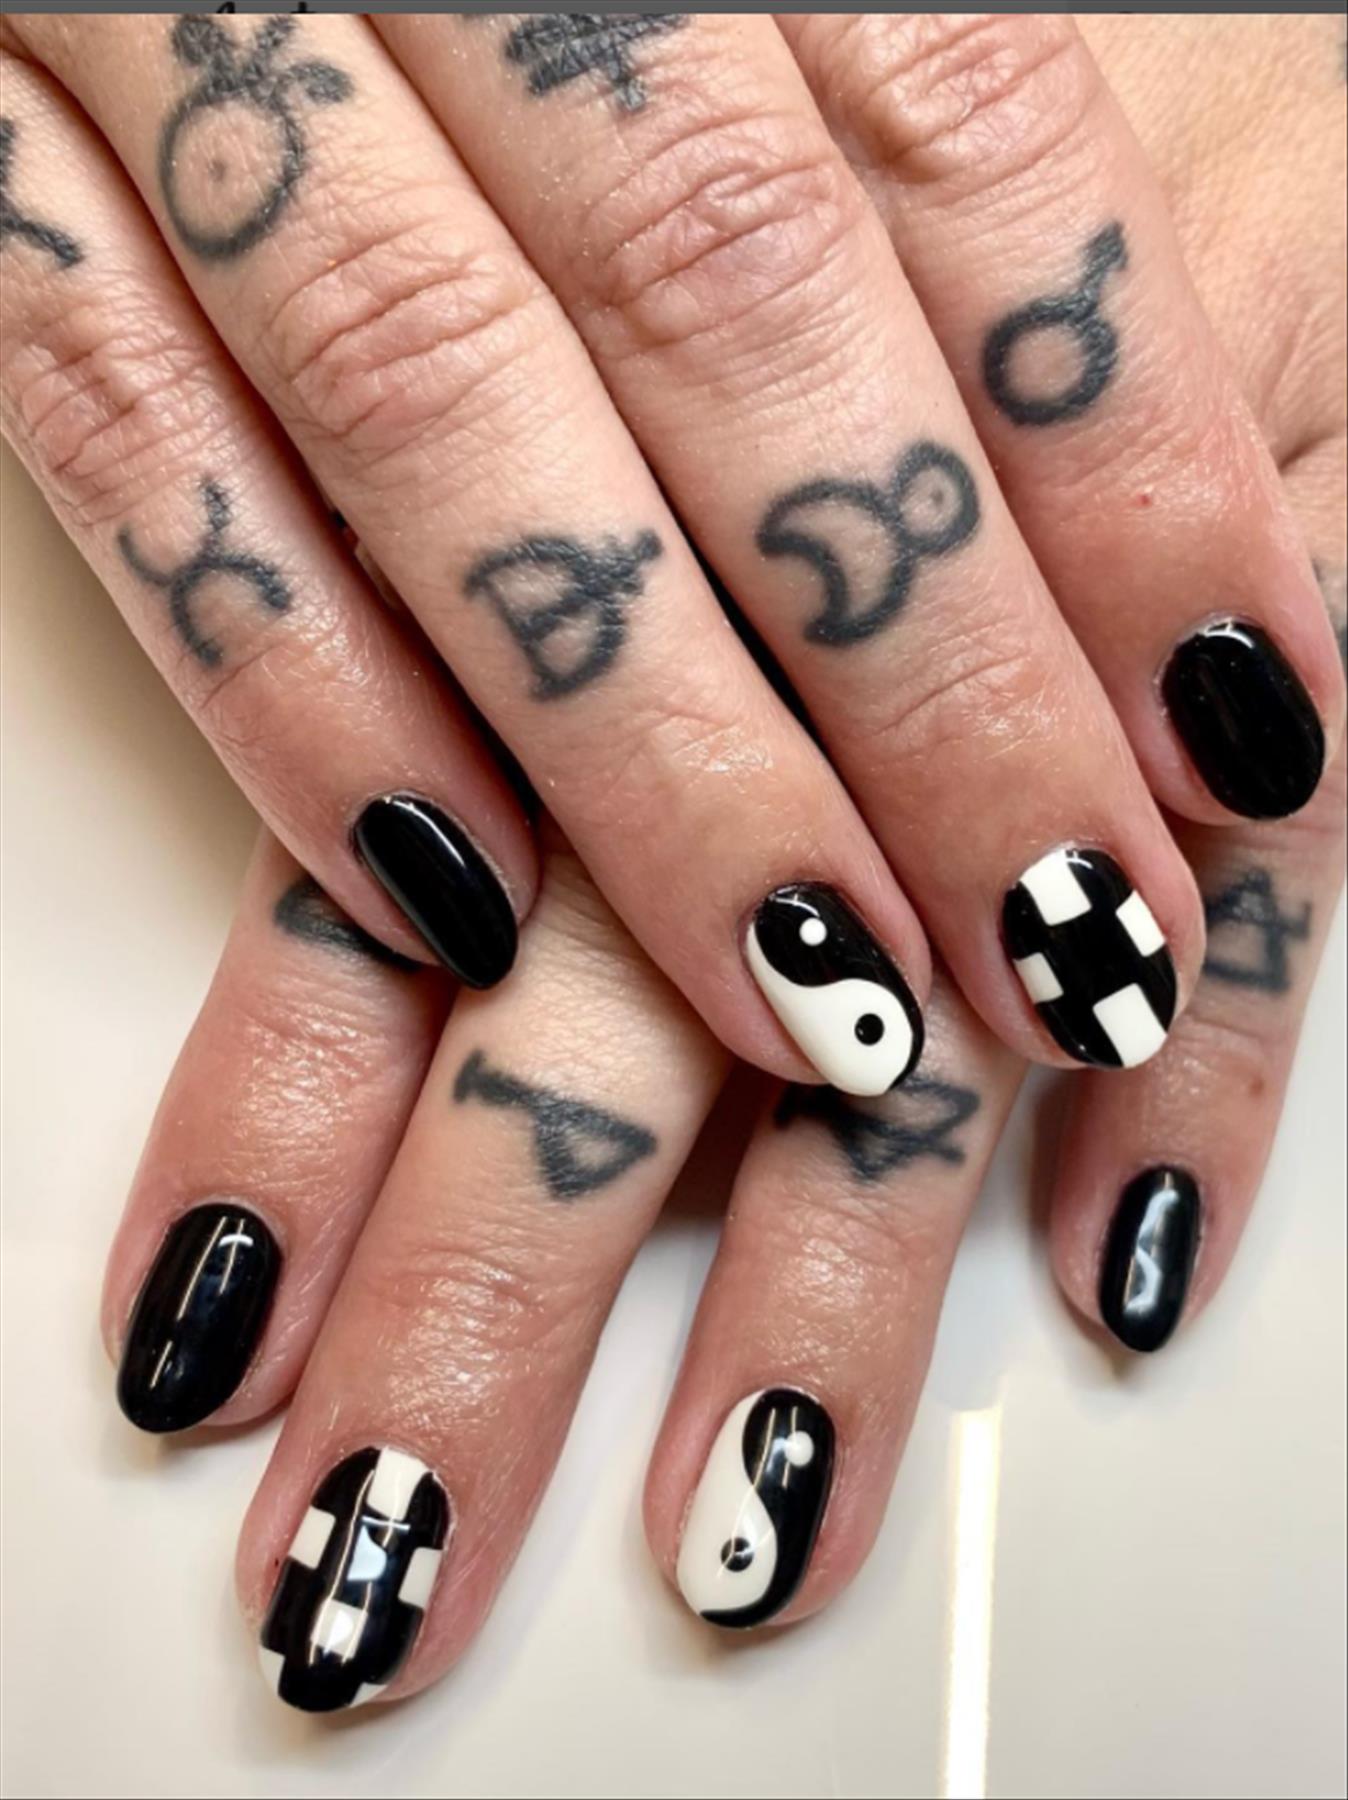 The Coolest Checkered Nail Art Designs of the Season